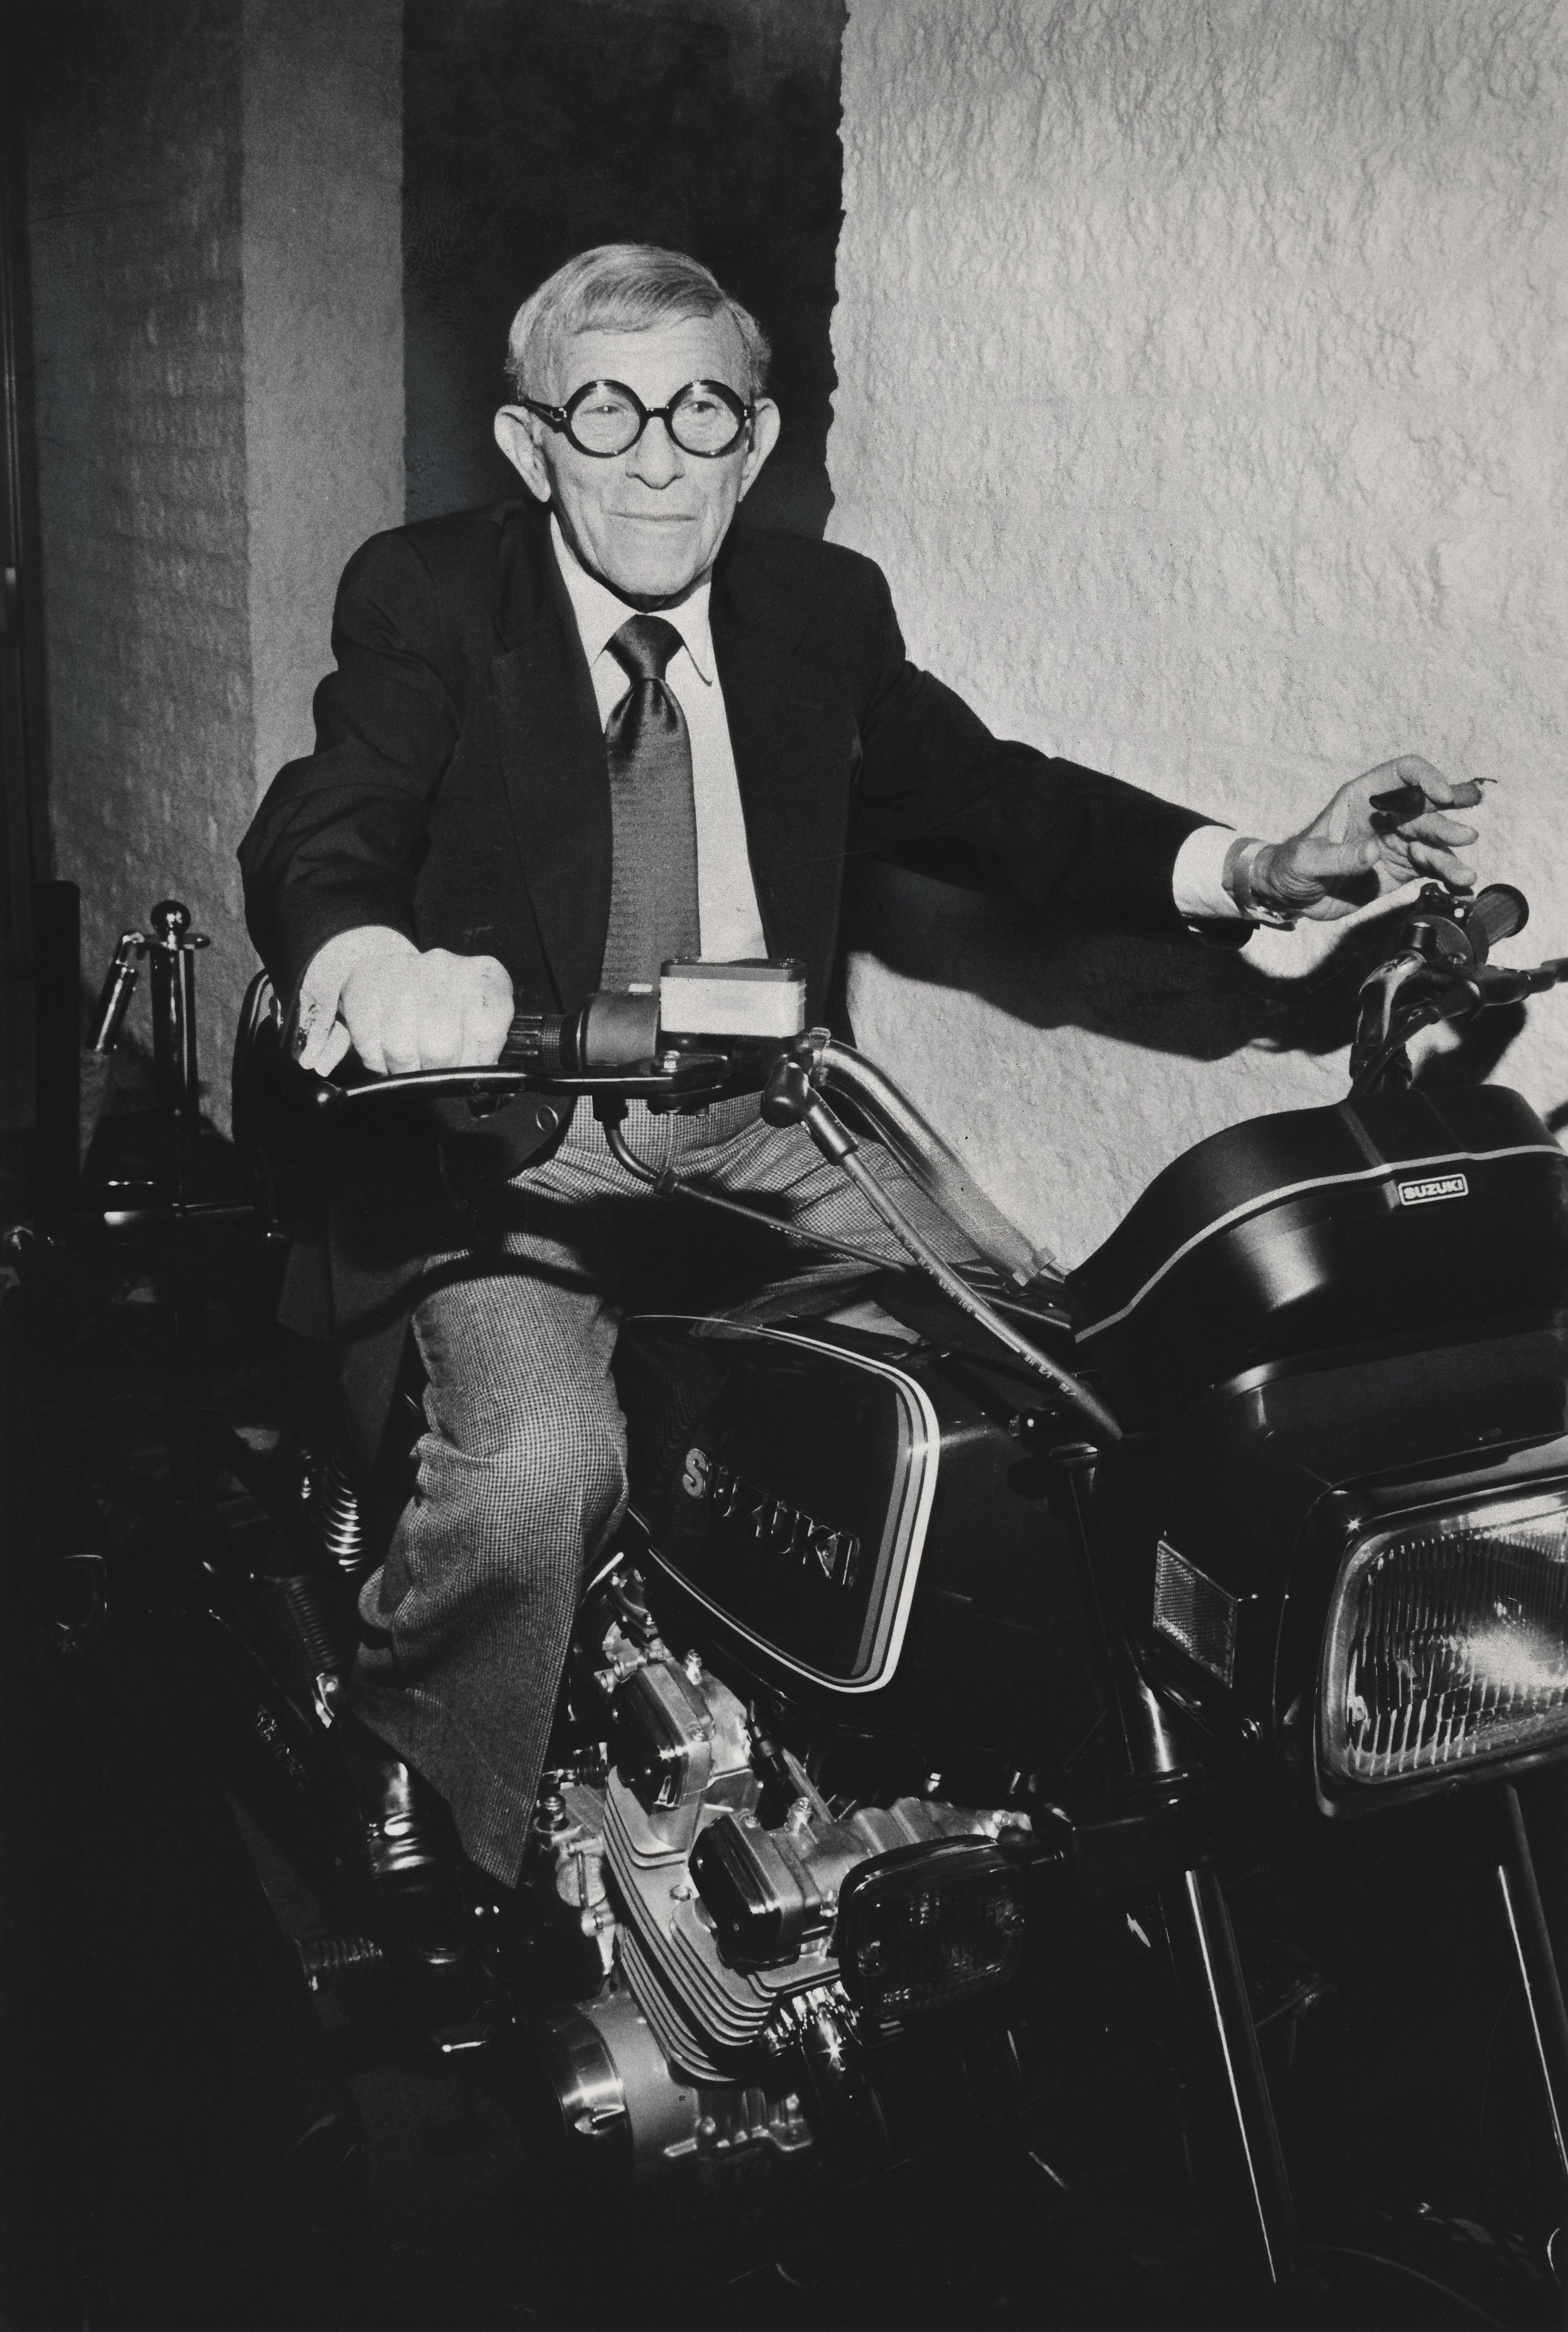 Unknown Black and White Photograph - George Burns: Famed Comedian on Motorcycle Fine Art Print